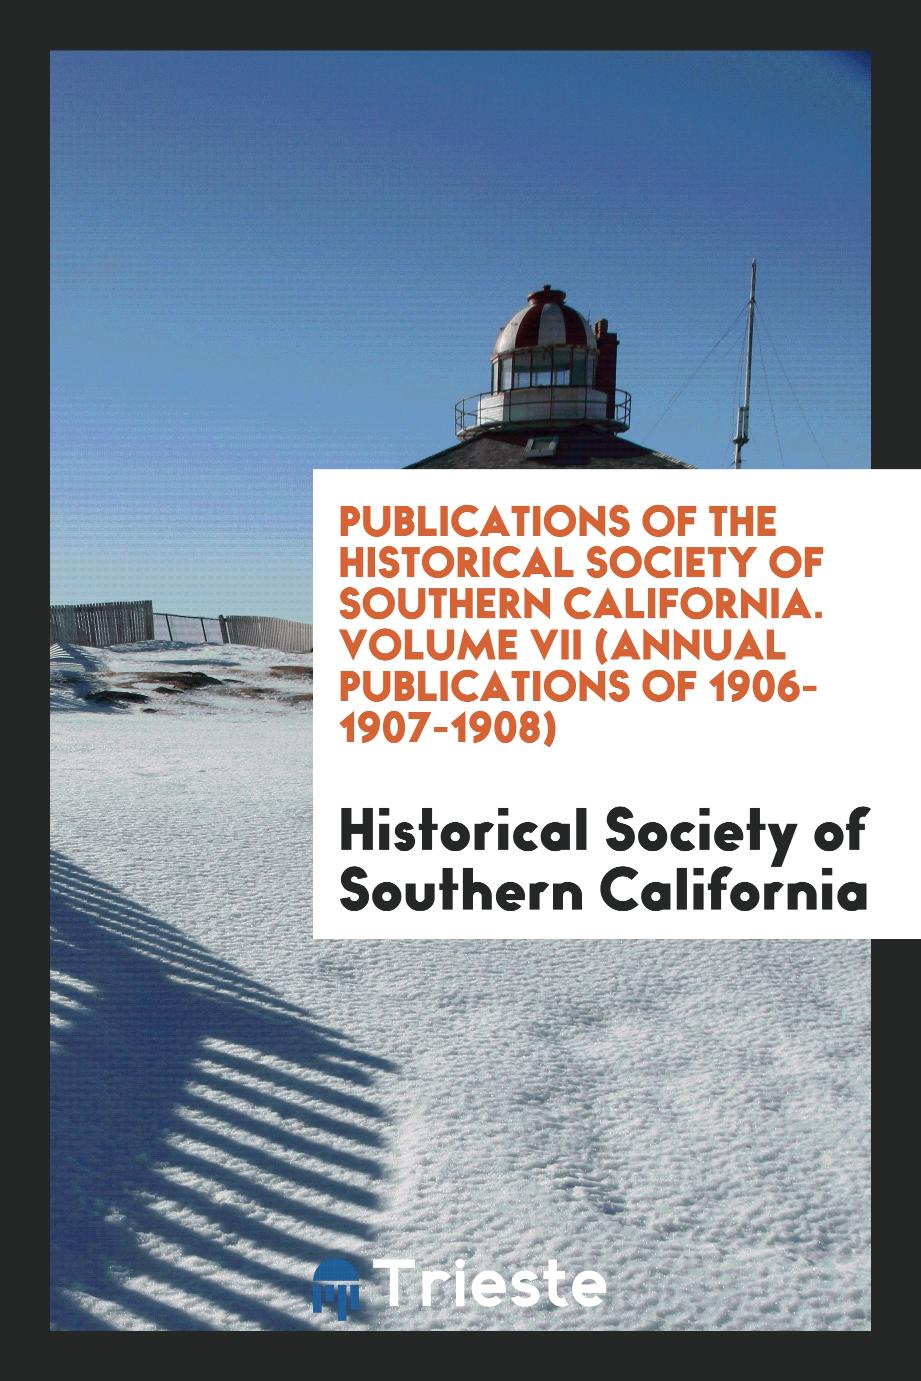 Publications of the Historical Society of Southern California. Volume VII (Annual Publications of 1906-1907-1908)